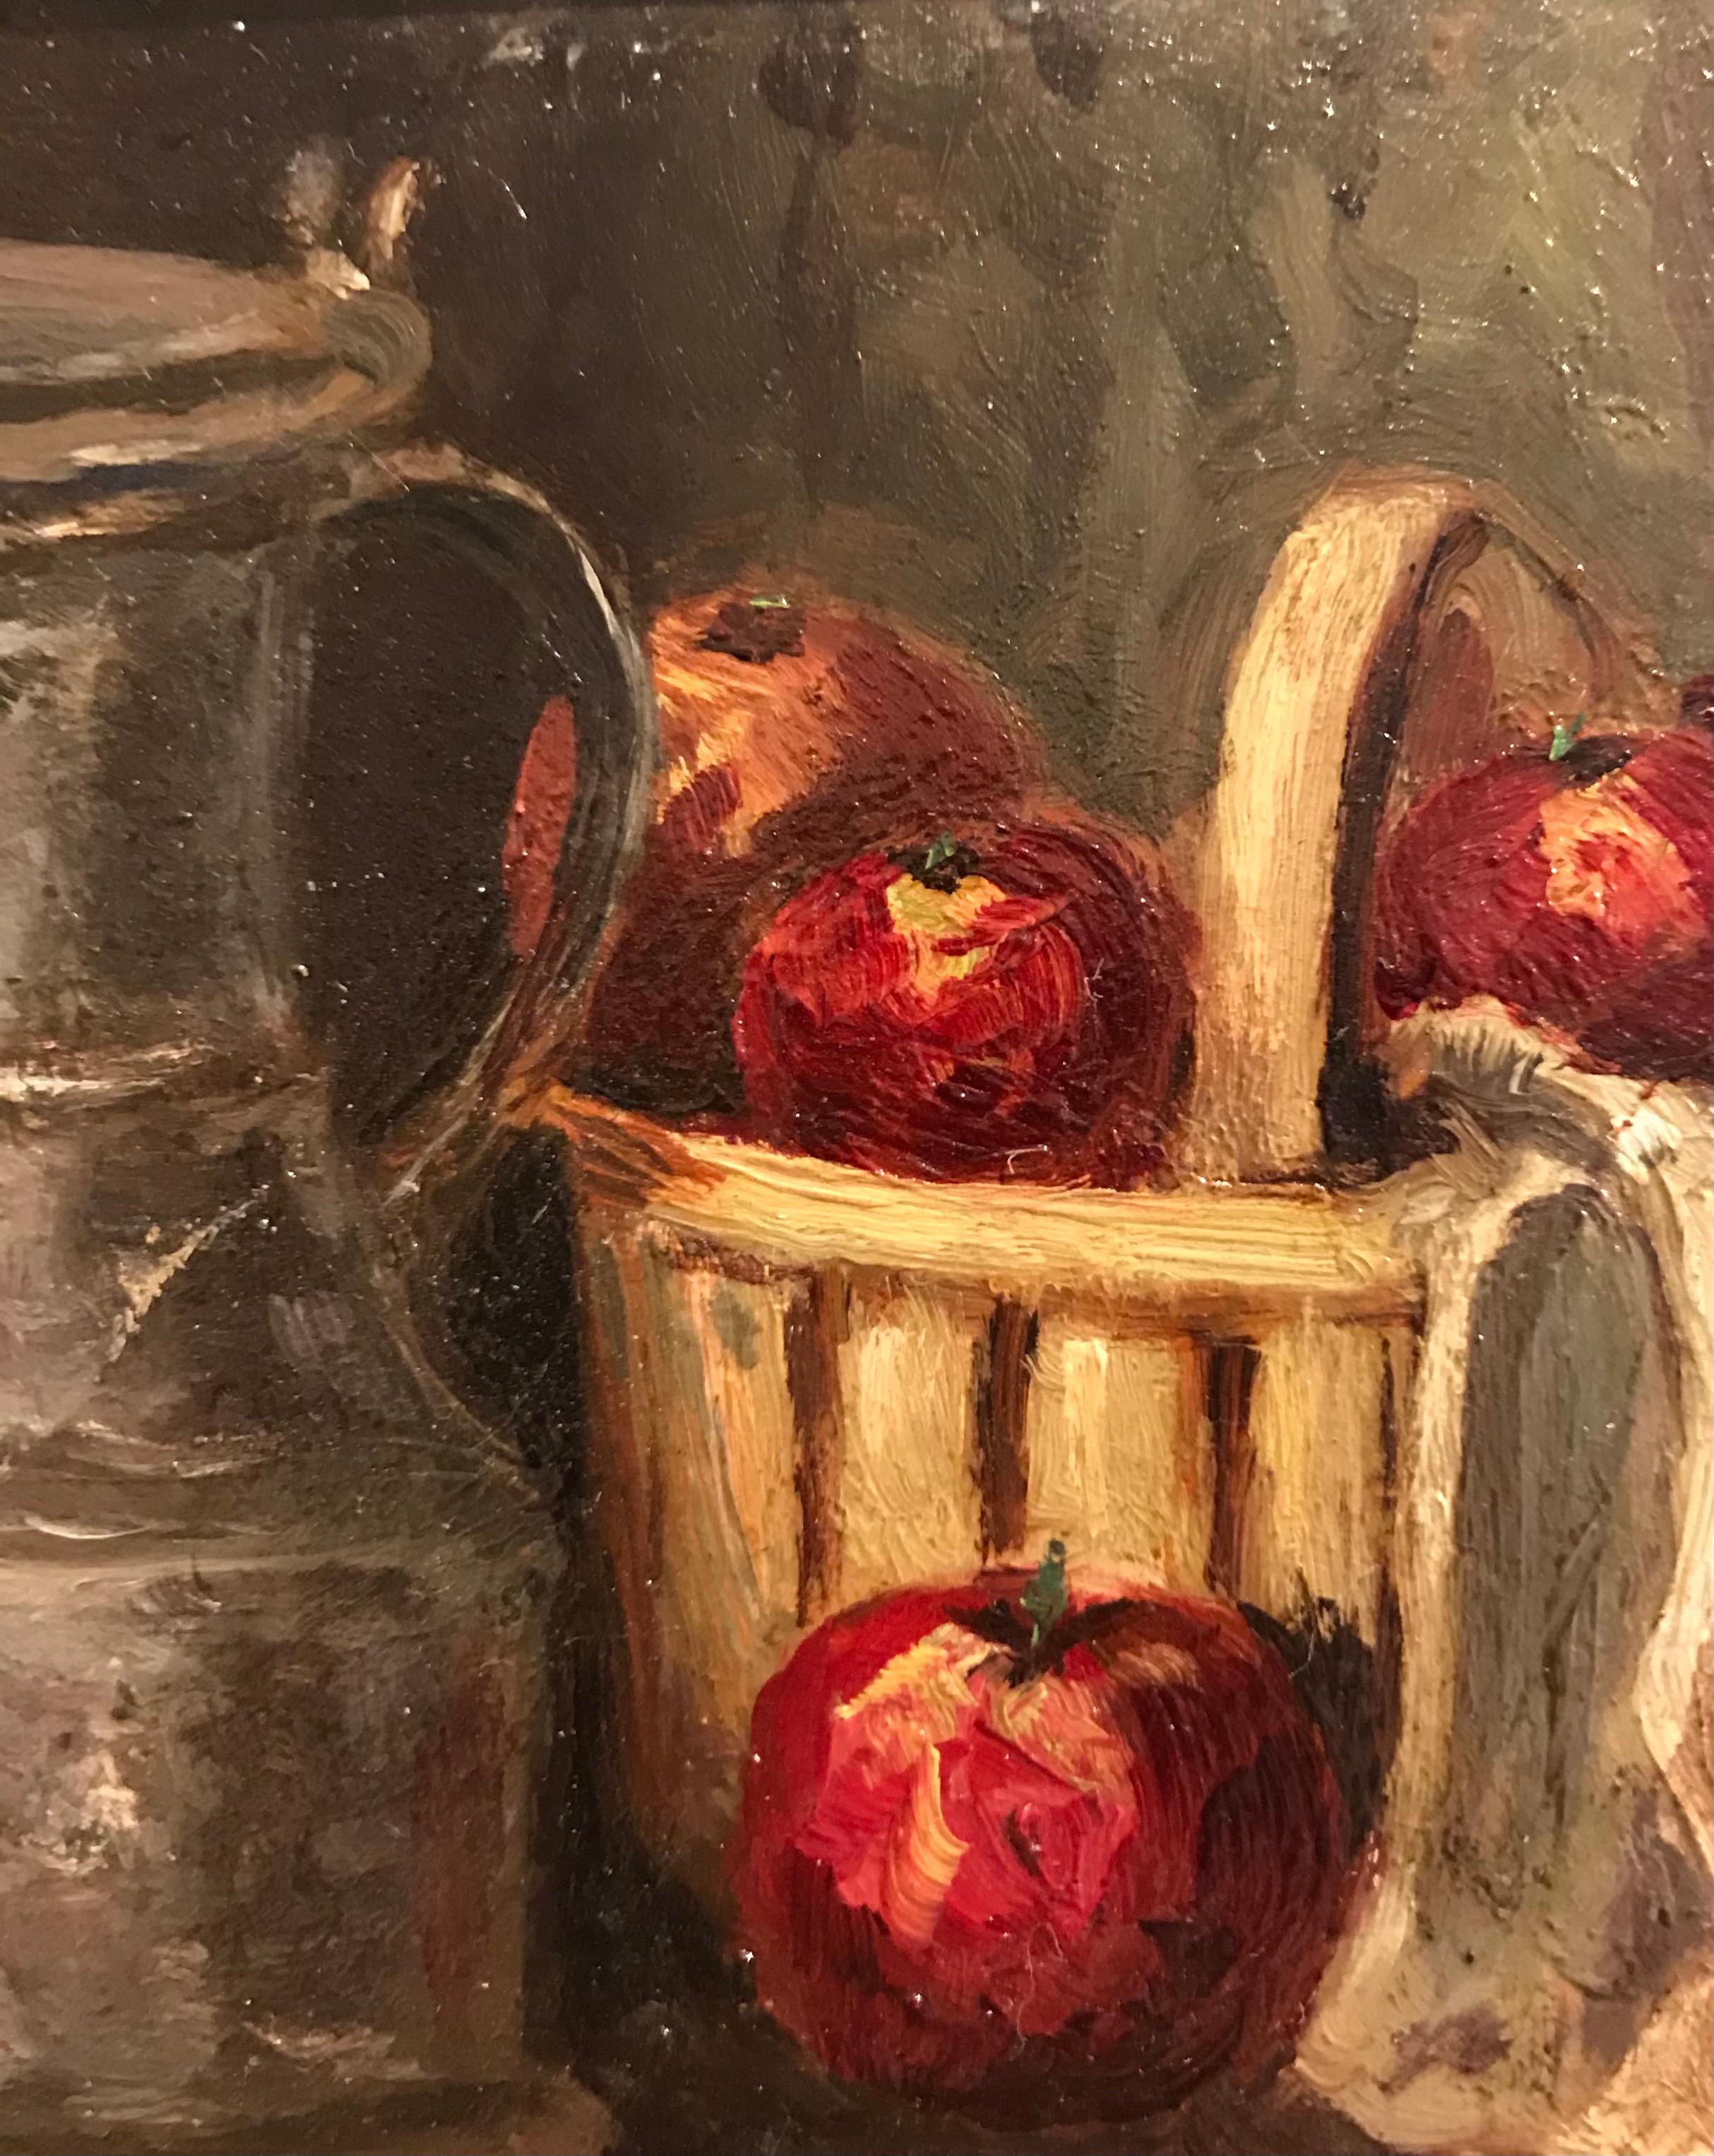 Still life with apples and channe by Georges Djakeli - Oil on wood 9x11 cm For Sale 1